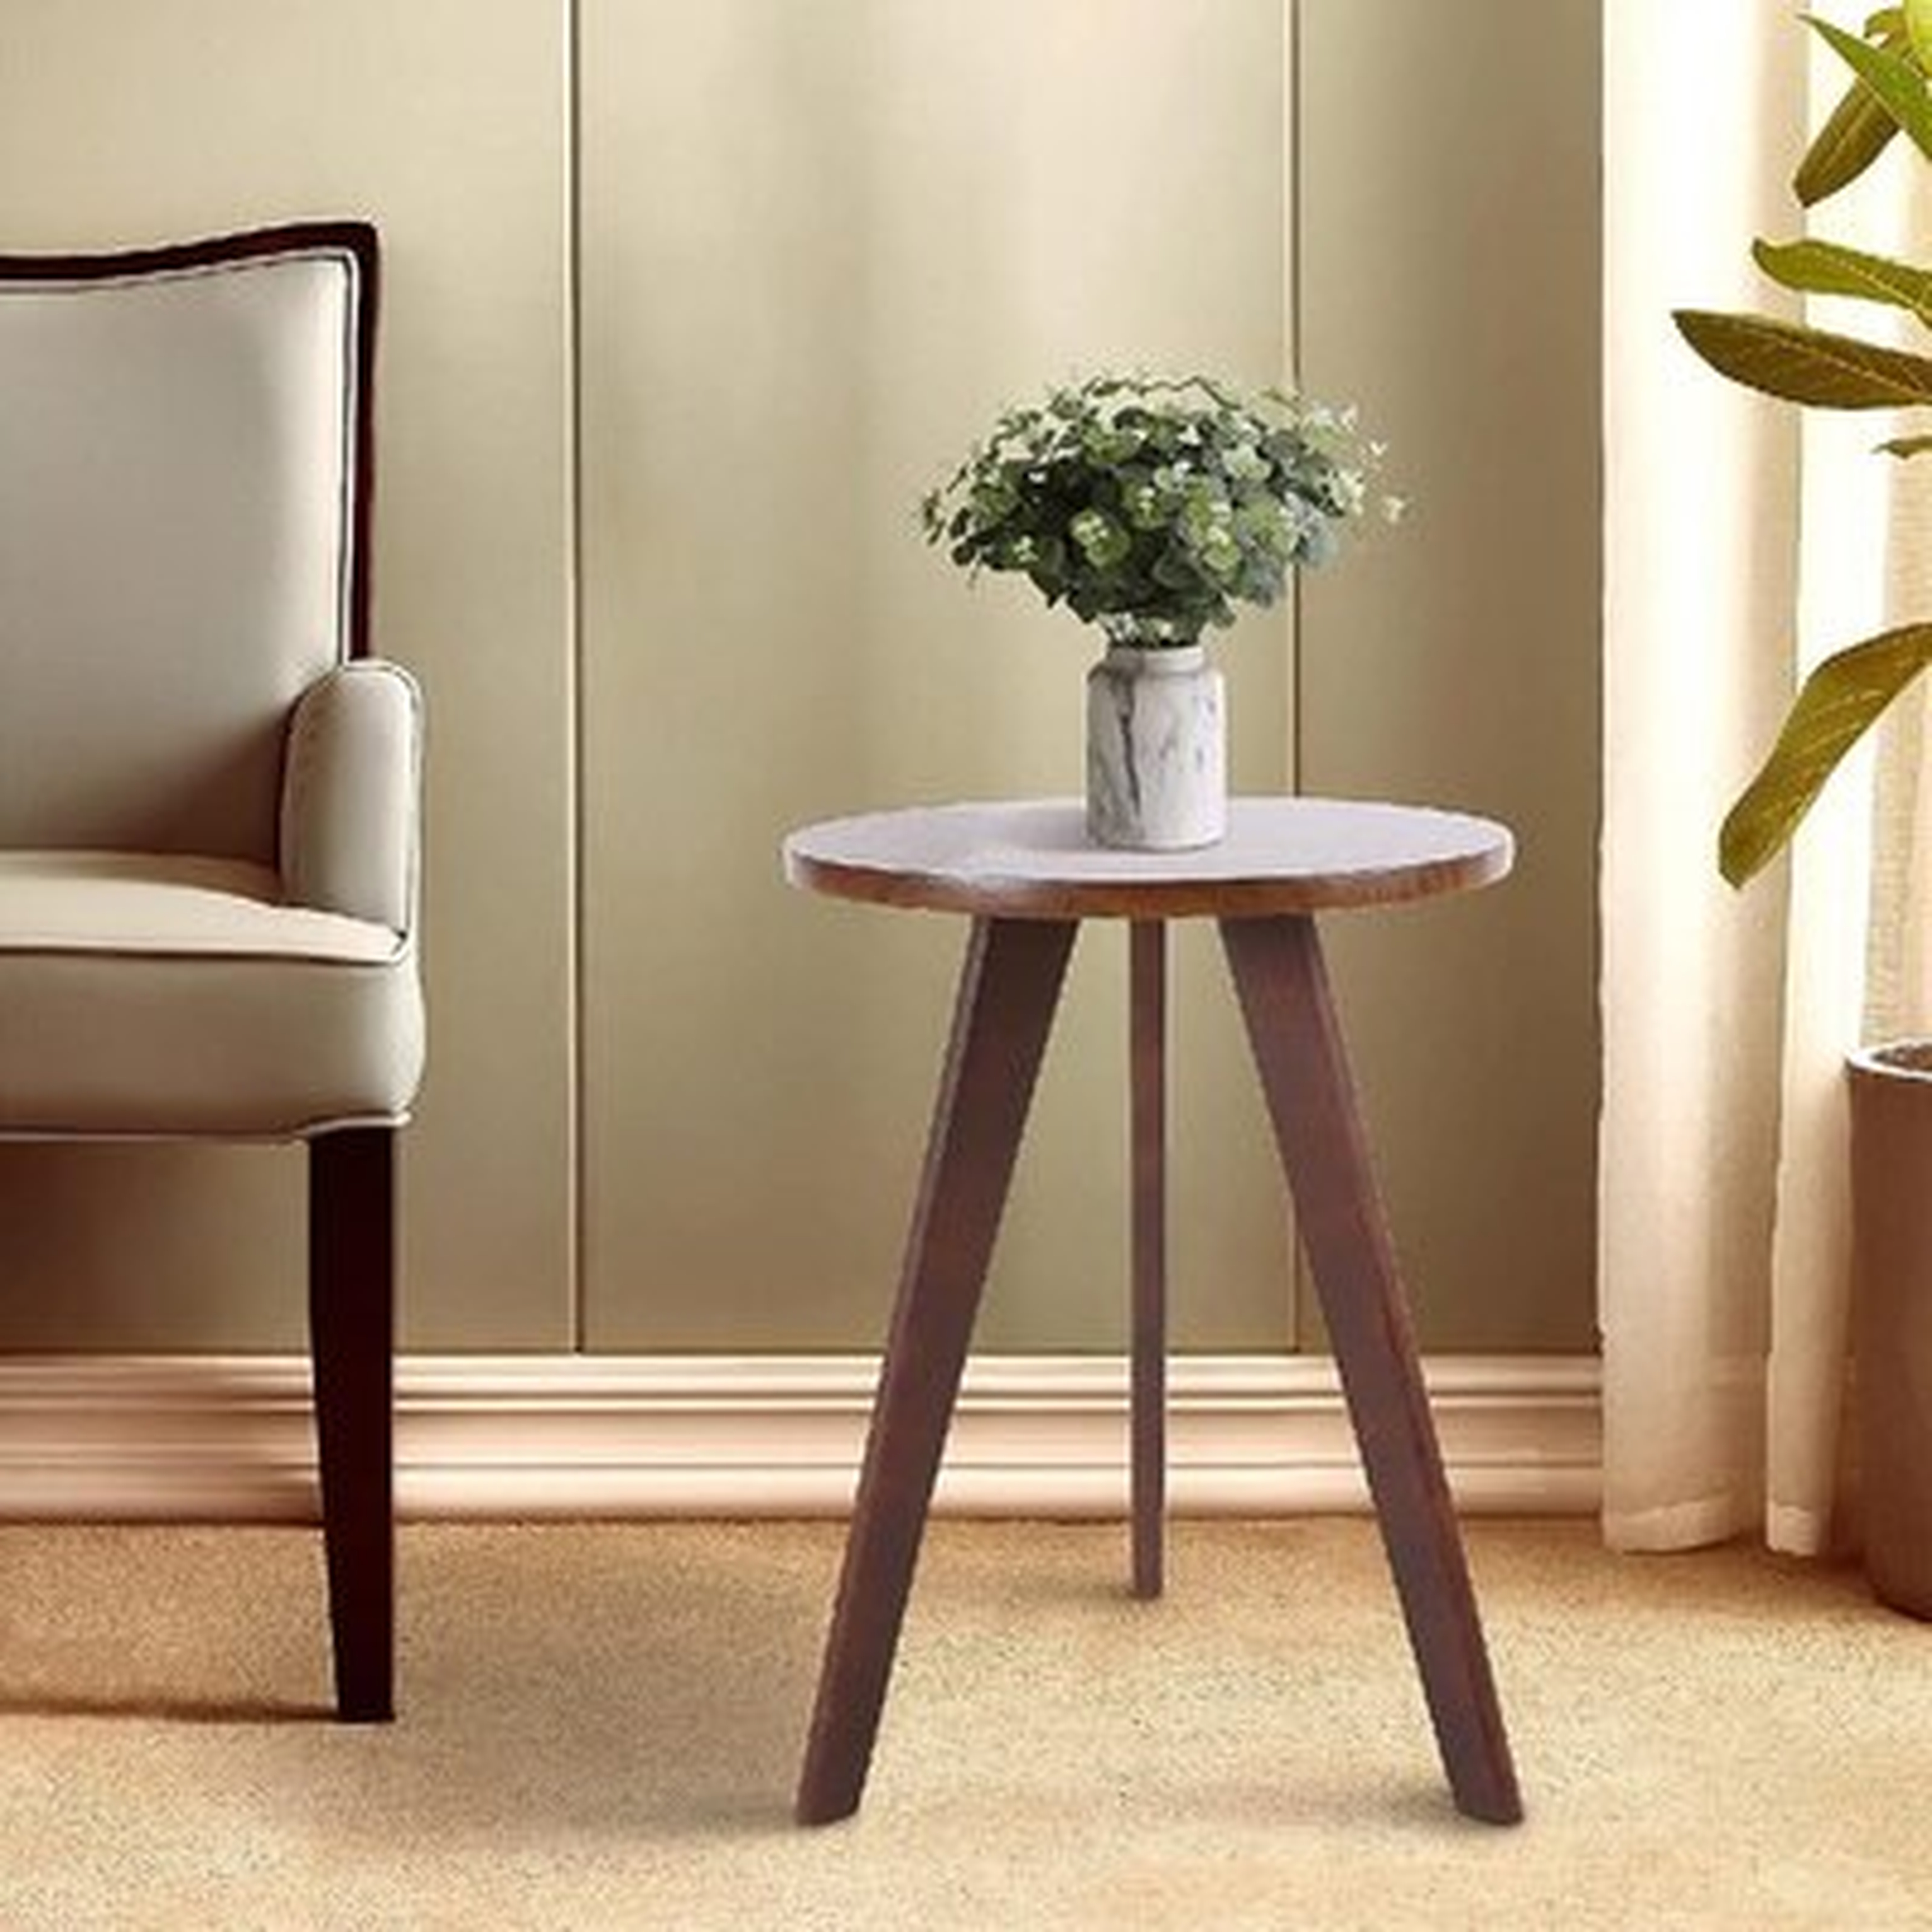 End Table Side Table Wood Coffee Table Round Sofa Table Small Nightstand Accent Table Easy Assembly Nesting Table Home Decor Bedside Table For Living Room Balcony Bedroom Office - Wayfair